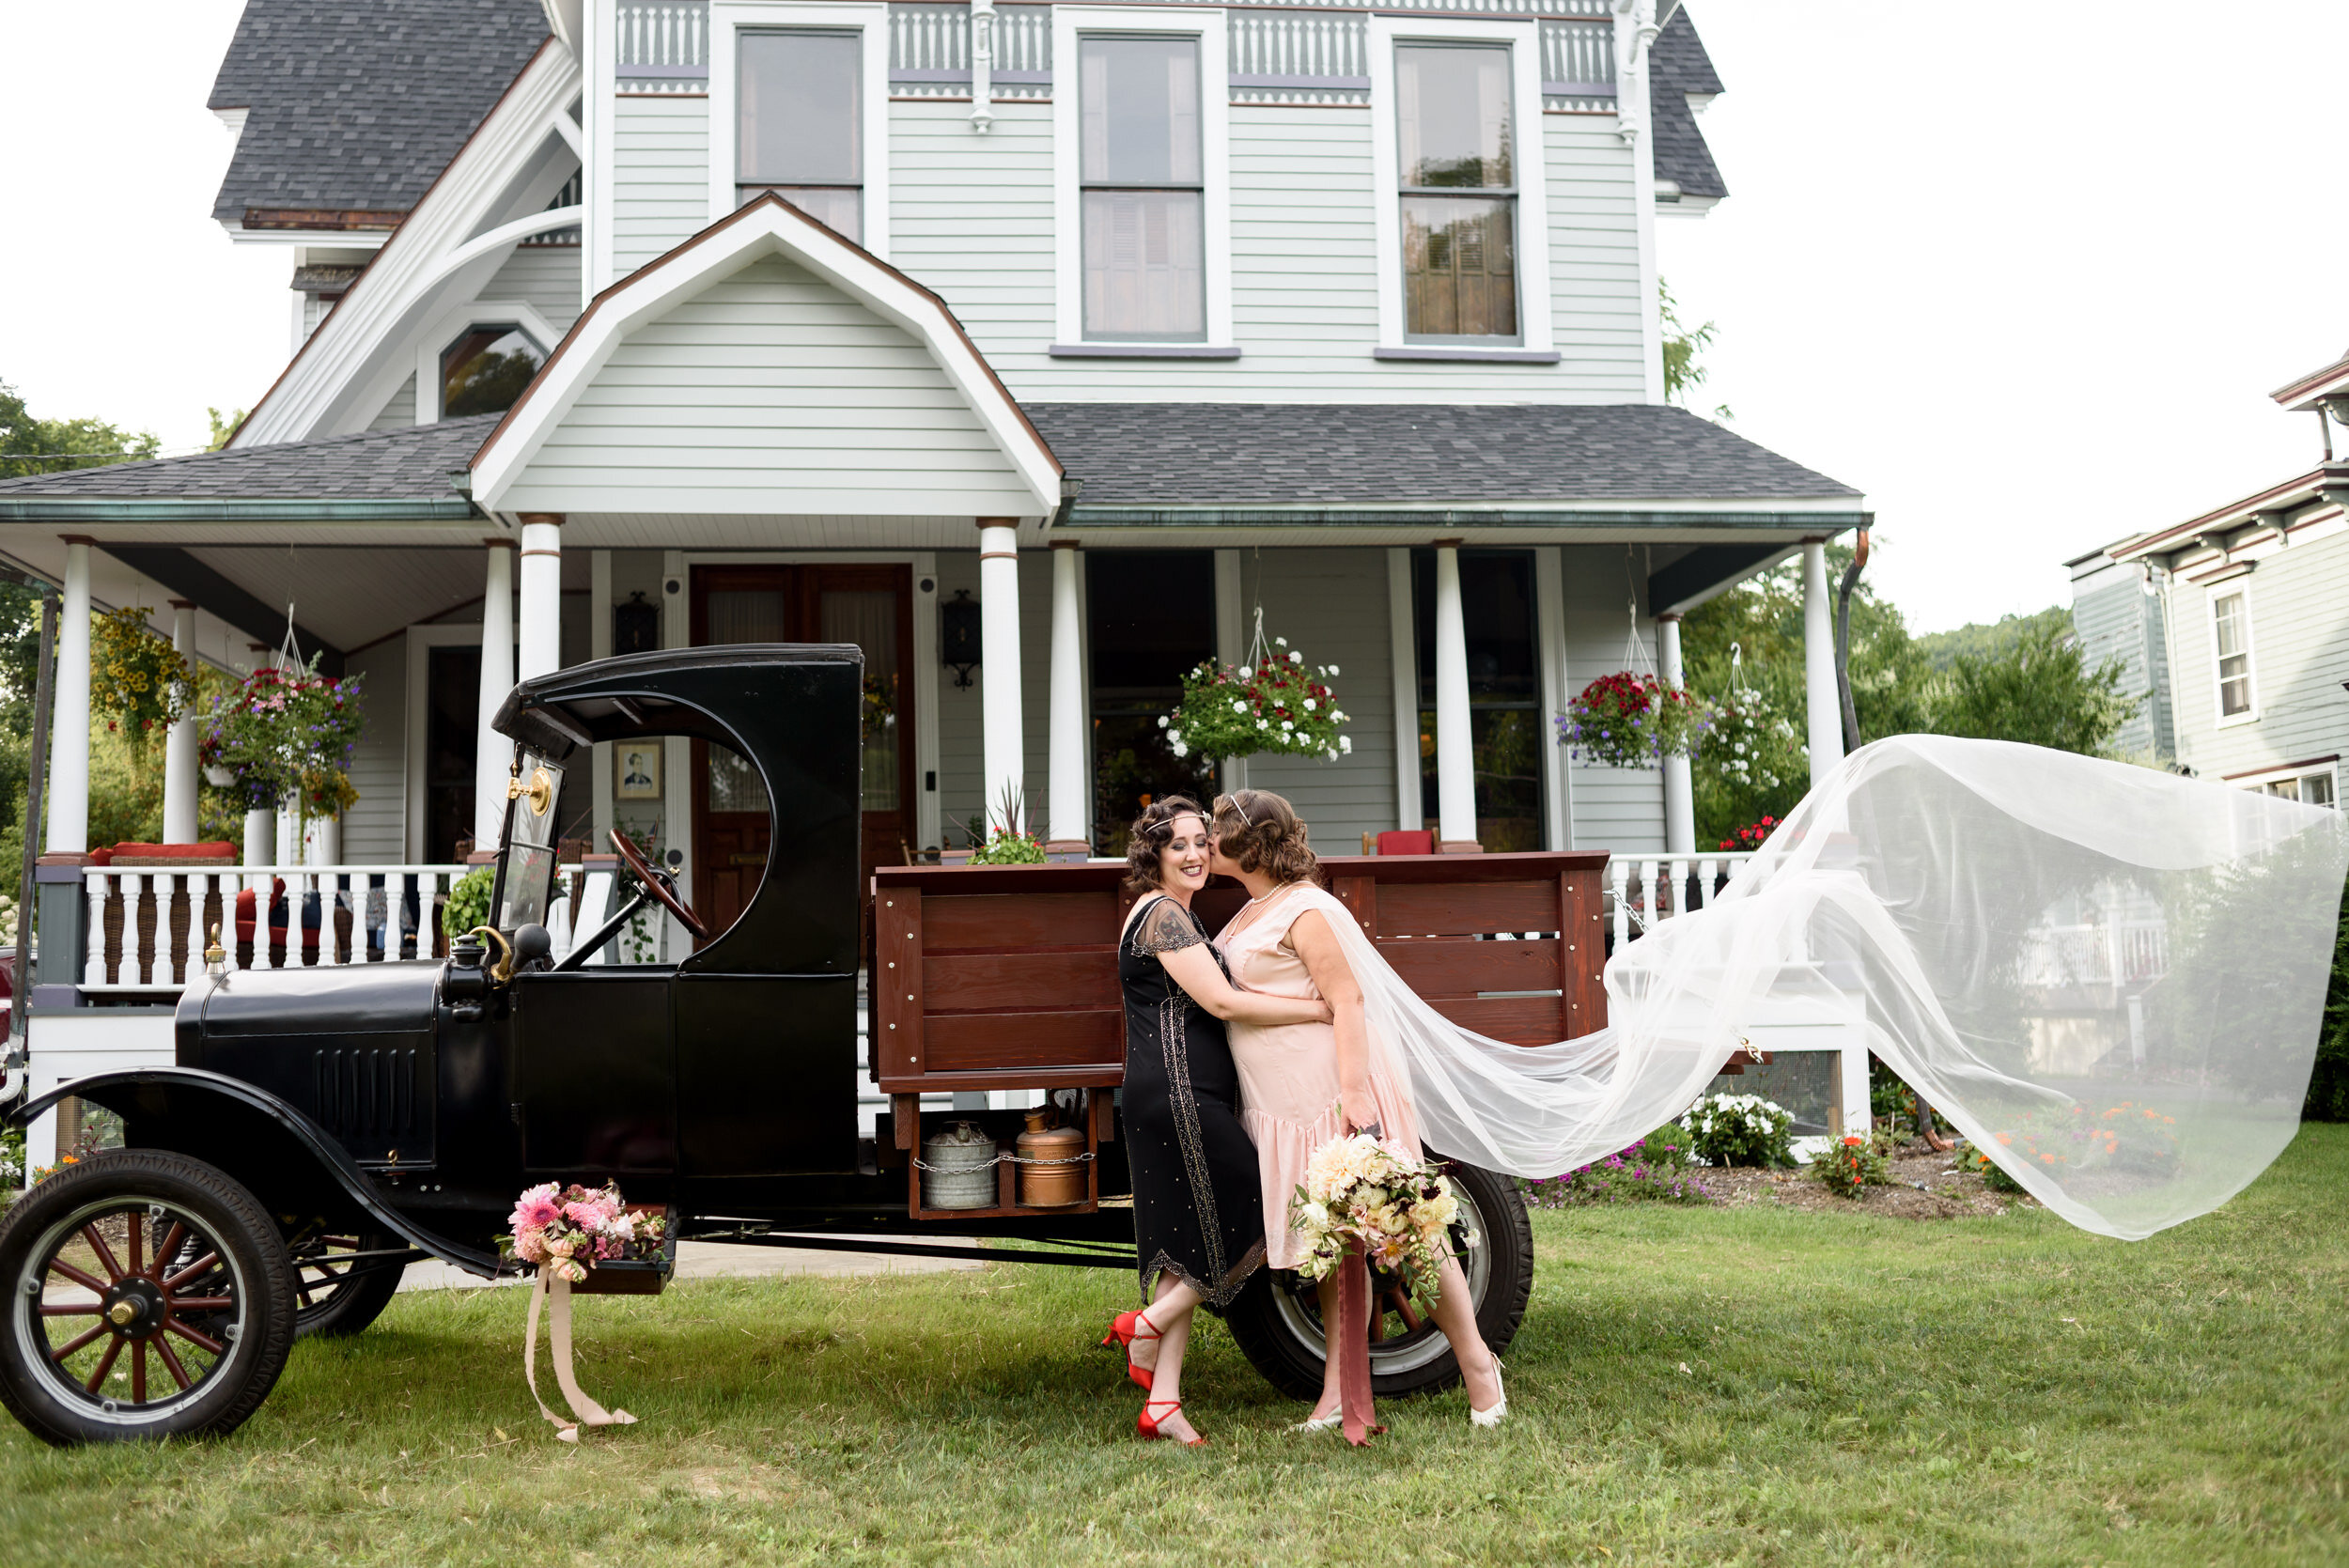 Brides after renewing their vows in upstate New York - Ithaca wedding photographer